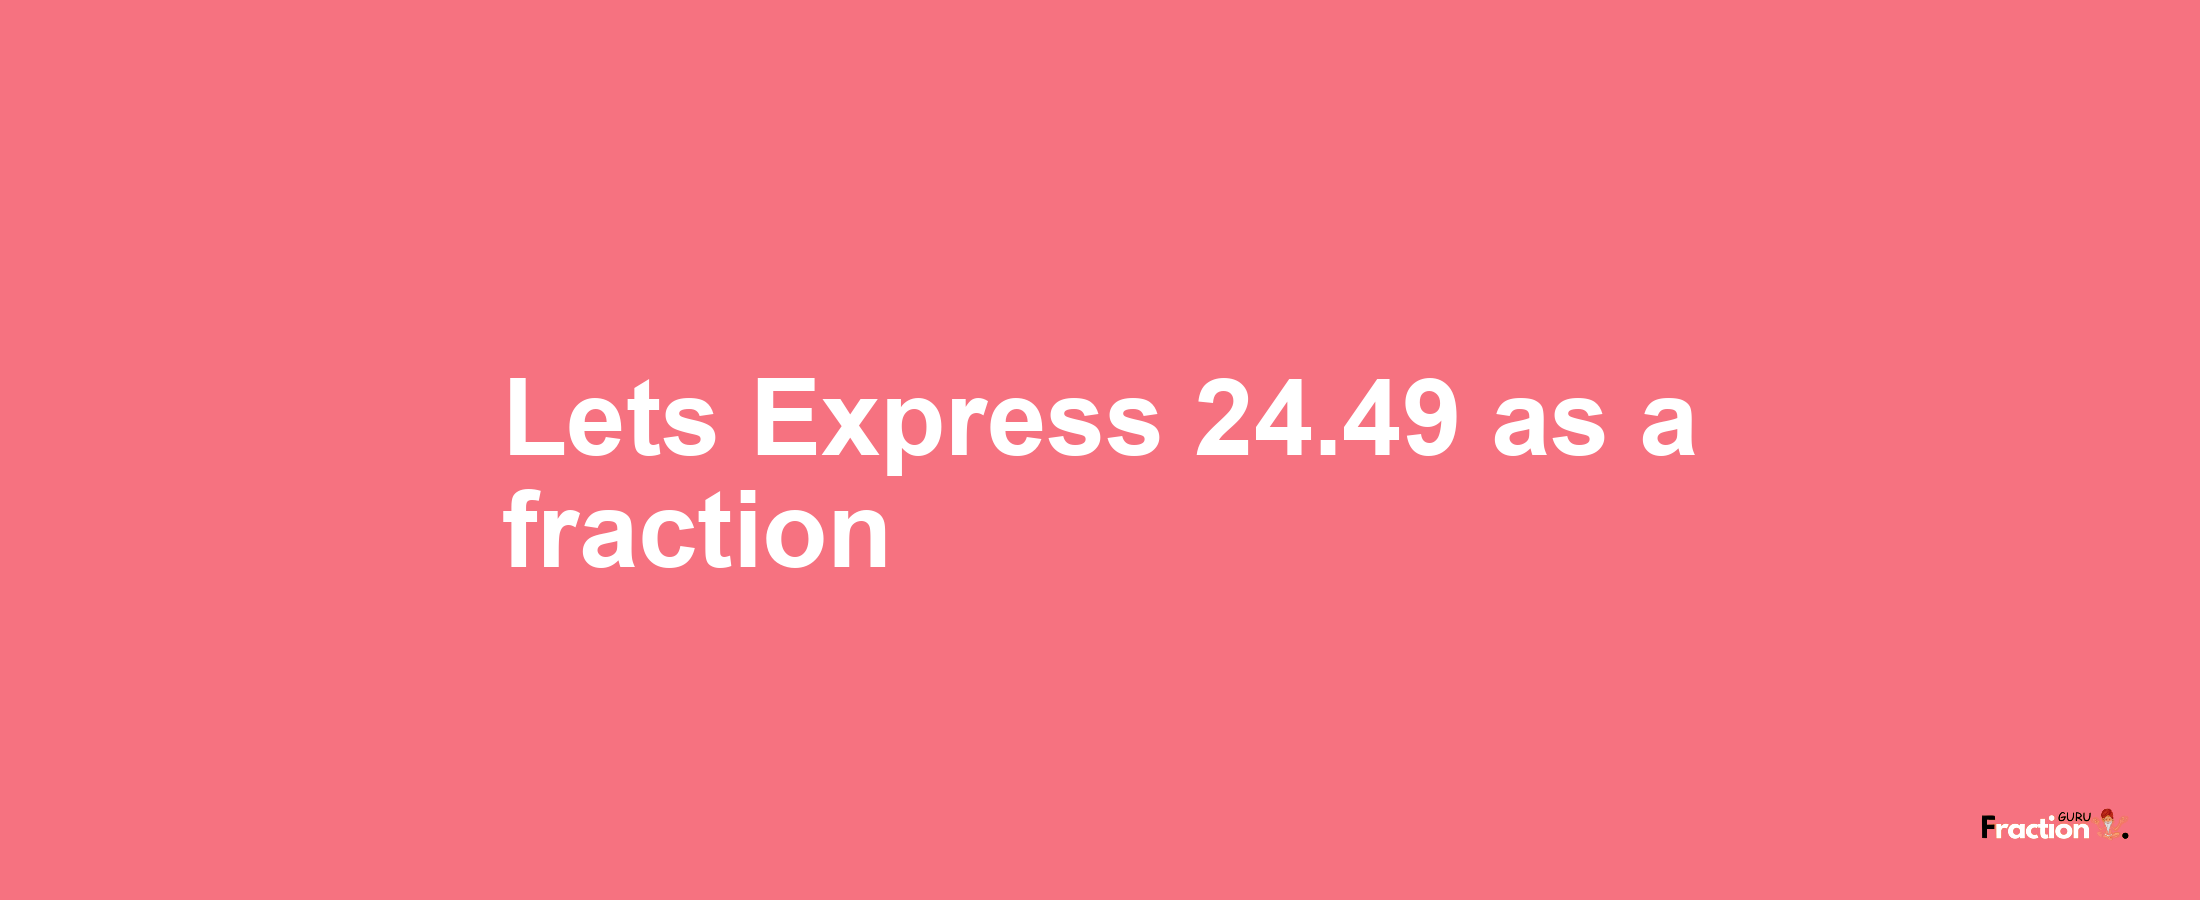 Lets Express 24.49 as afraction